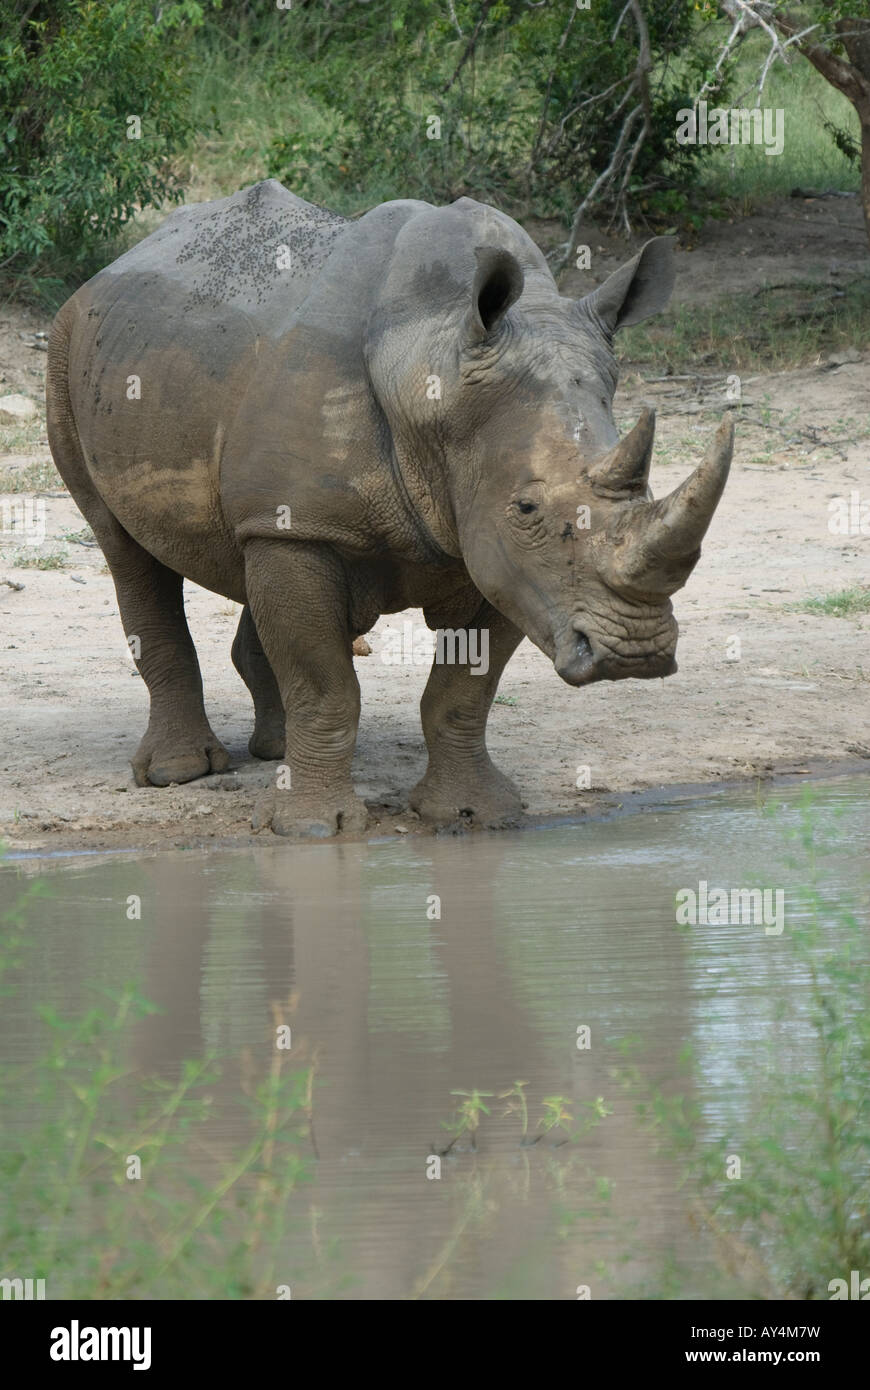 A white rhino standing at the edge of a waterhole in the African bush Stock Photo